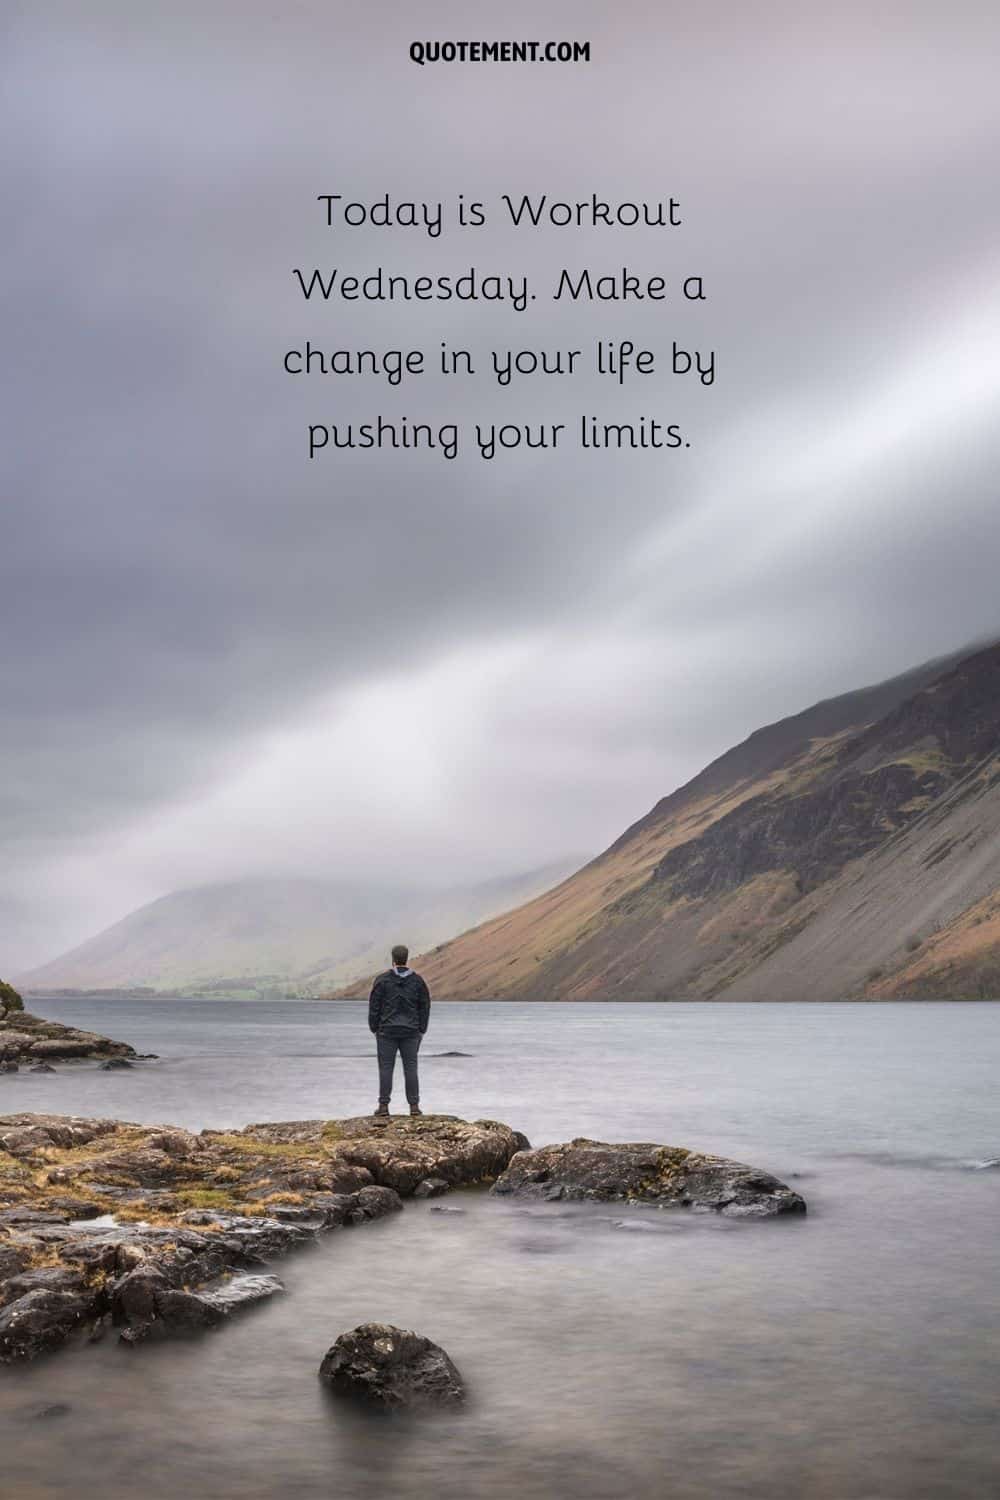 man standing on water stone surrounded by nature representing Wednesday workout quote